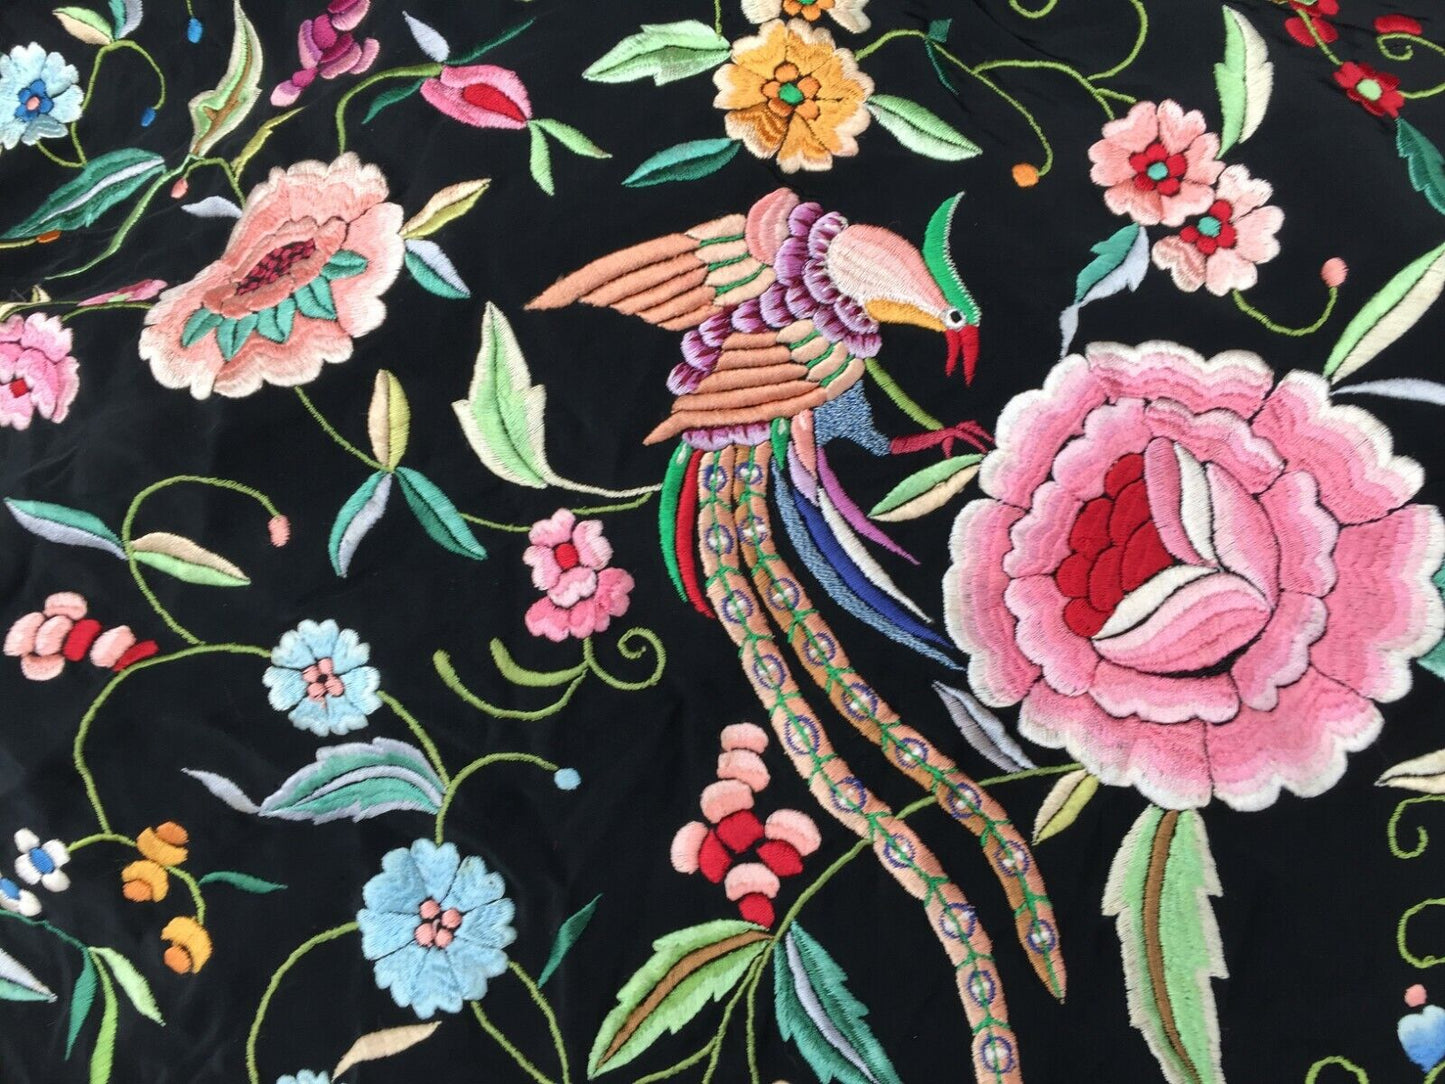  Close-up of the intricate silk embroideries depicting delicate flowers in shades of pink, white, and other colors against the black canvas